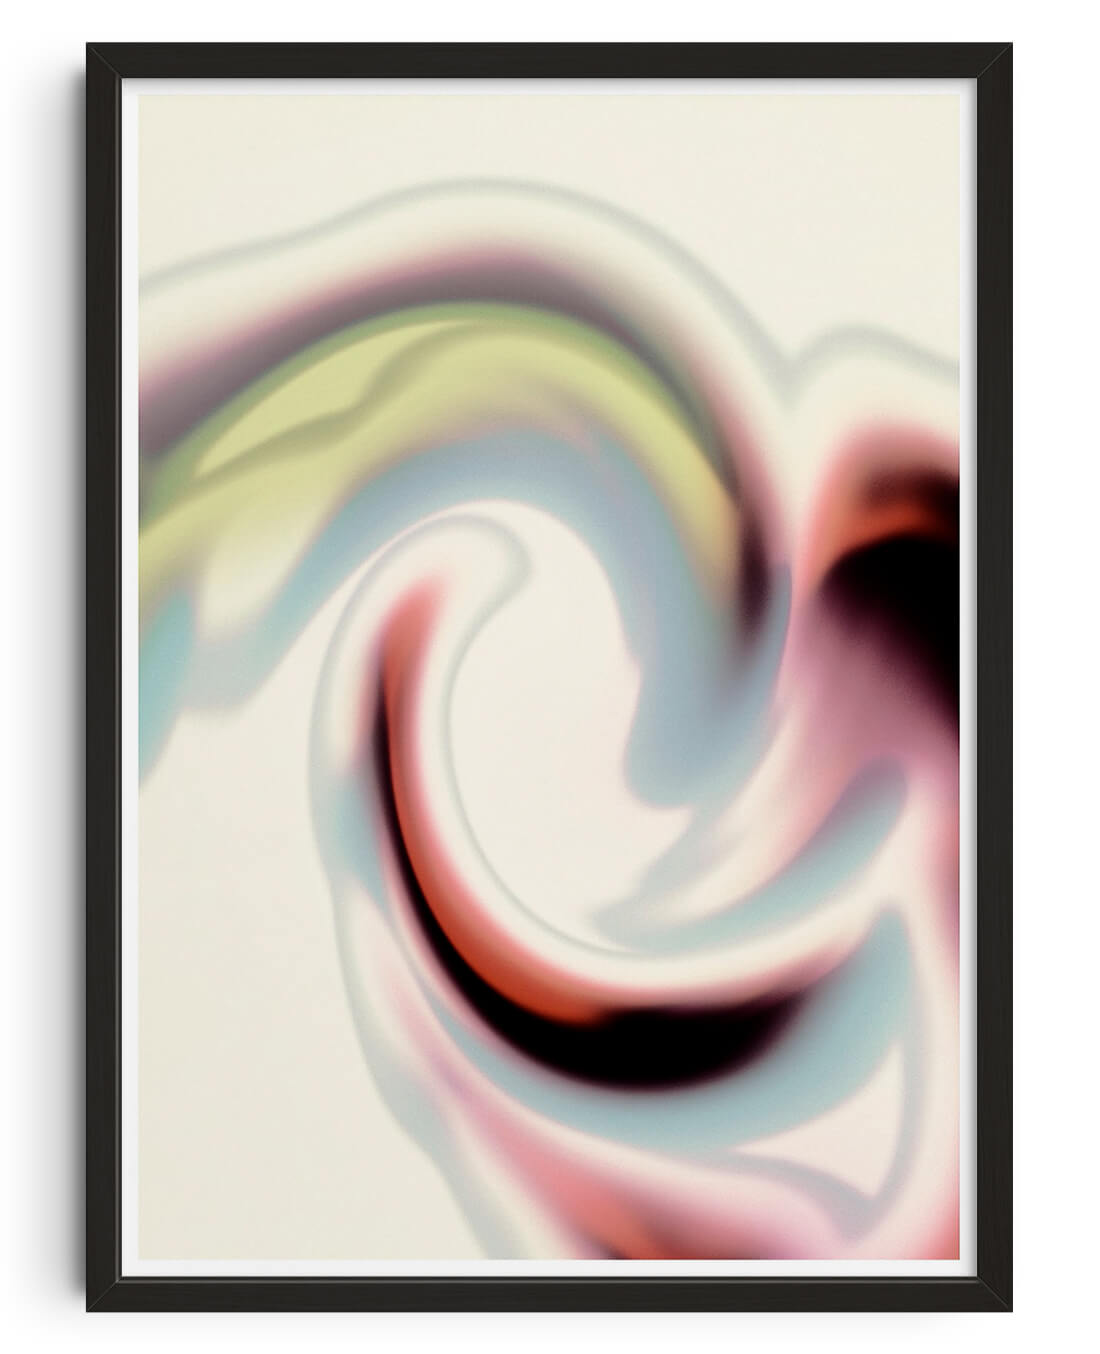 Swirl by Henry M. contemporary wall art print from DROOL